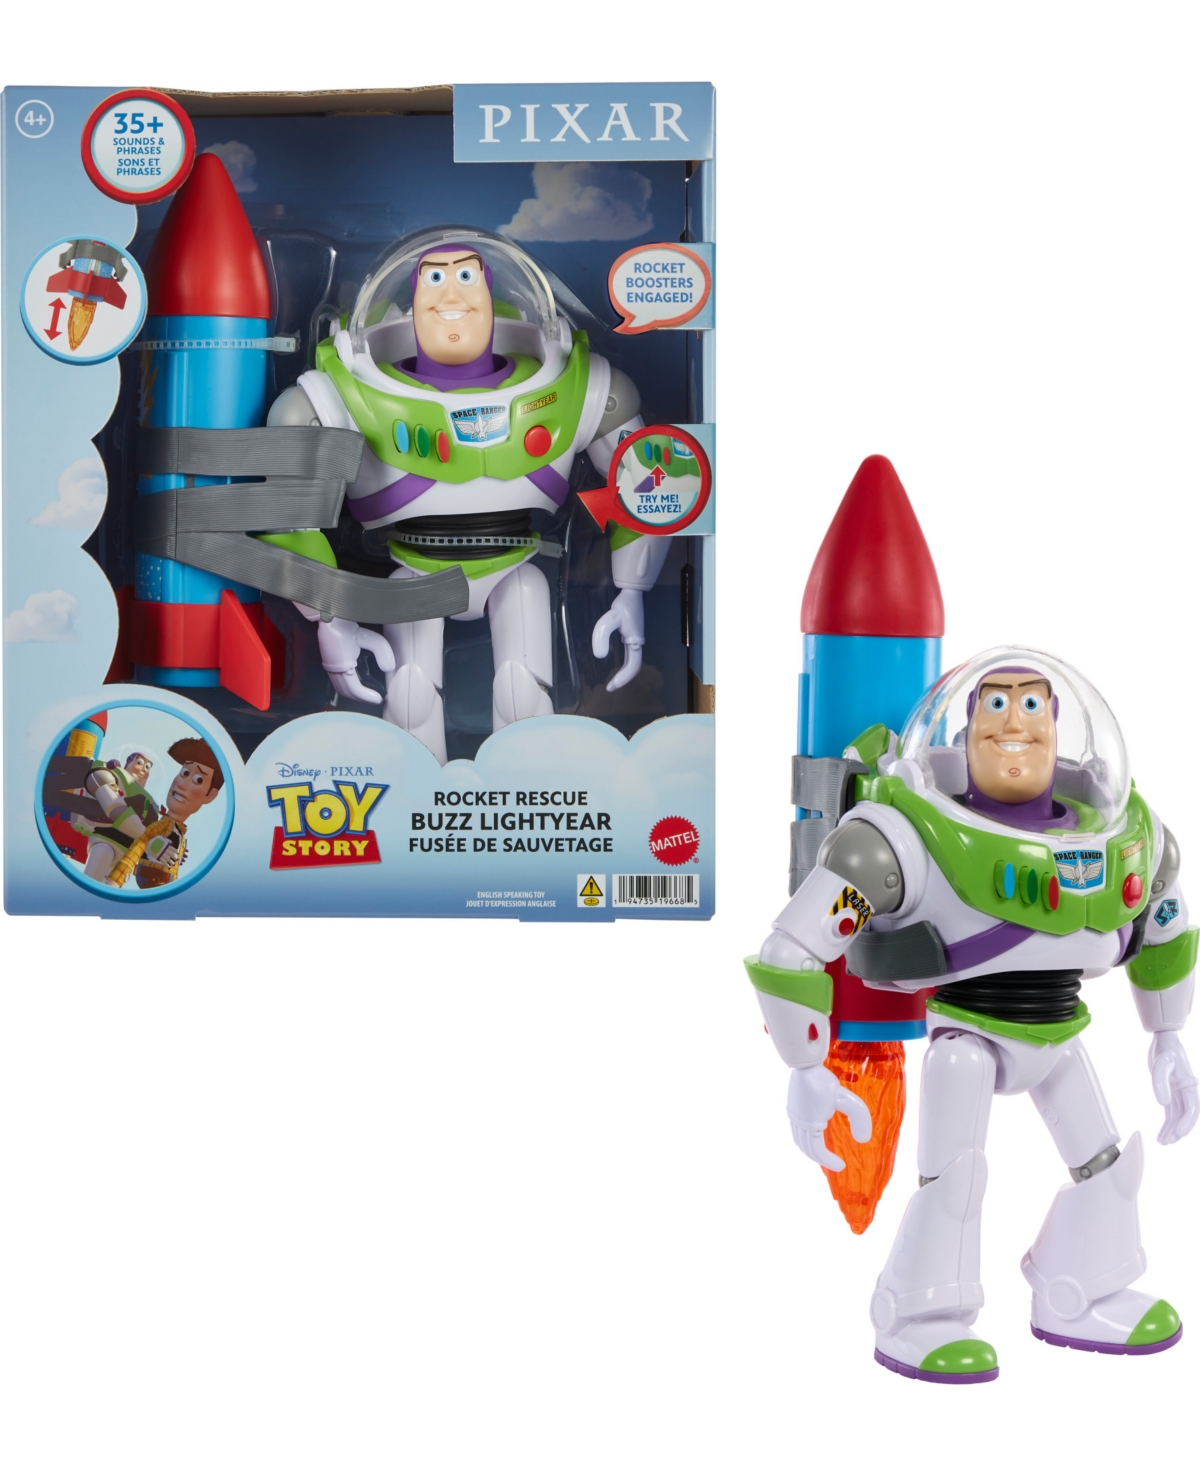 Disney Pixar Toy Story Buzz Lightyear 10" Action Figure Toy With Rocket And Sounds In No Color